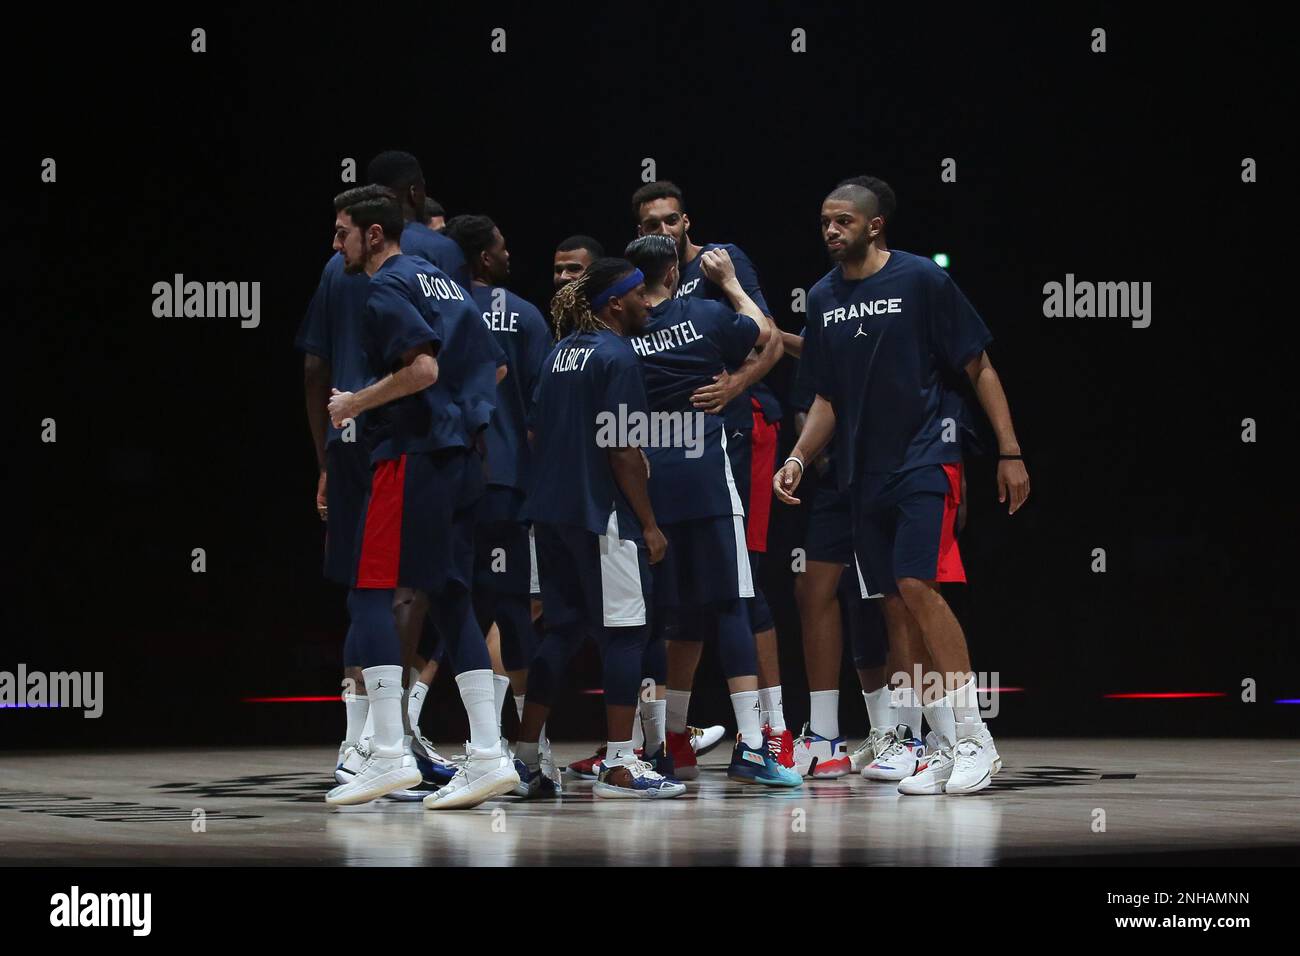 AUG 7, 2021: Team France in the Men's Basketball Final between USA and France at the Tokyo 2020 Olympic Games (Photo by Mickael Chavet/RX) Stock Photo